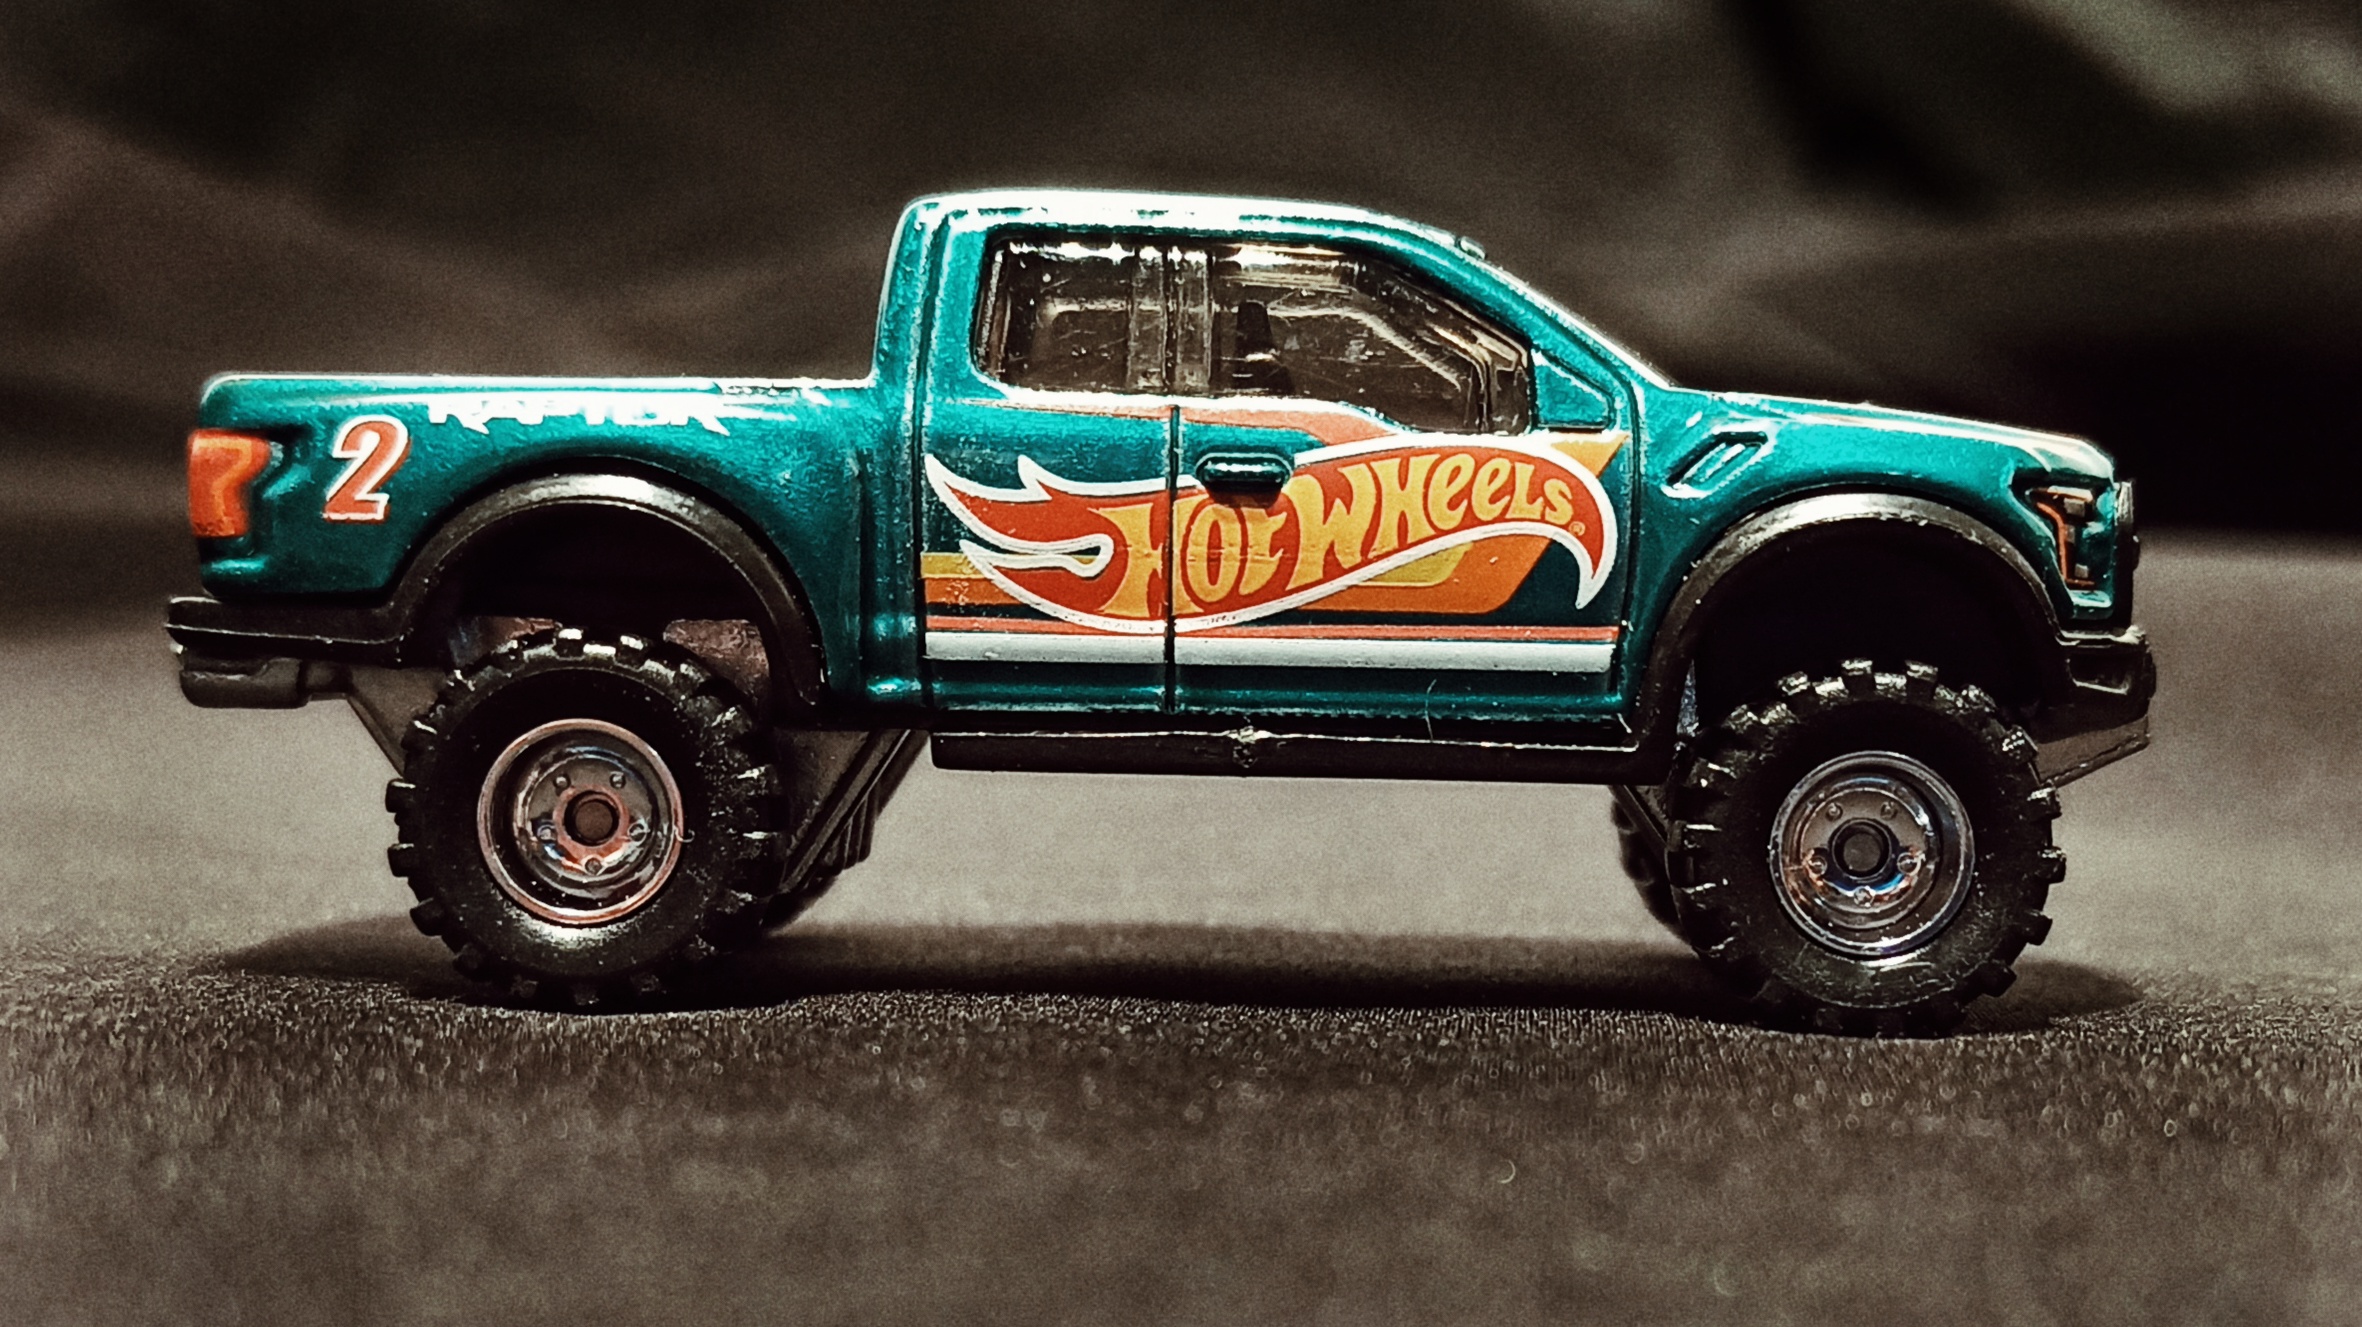 Hot Wheels '17 Ford F-150 Raptor (GTD72) 2021 Collector Edition (Dollar General Mail-in) spectraflame aqua green side